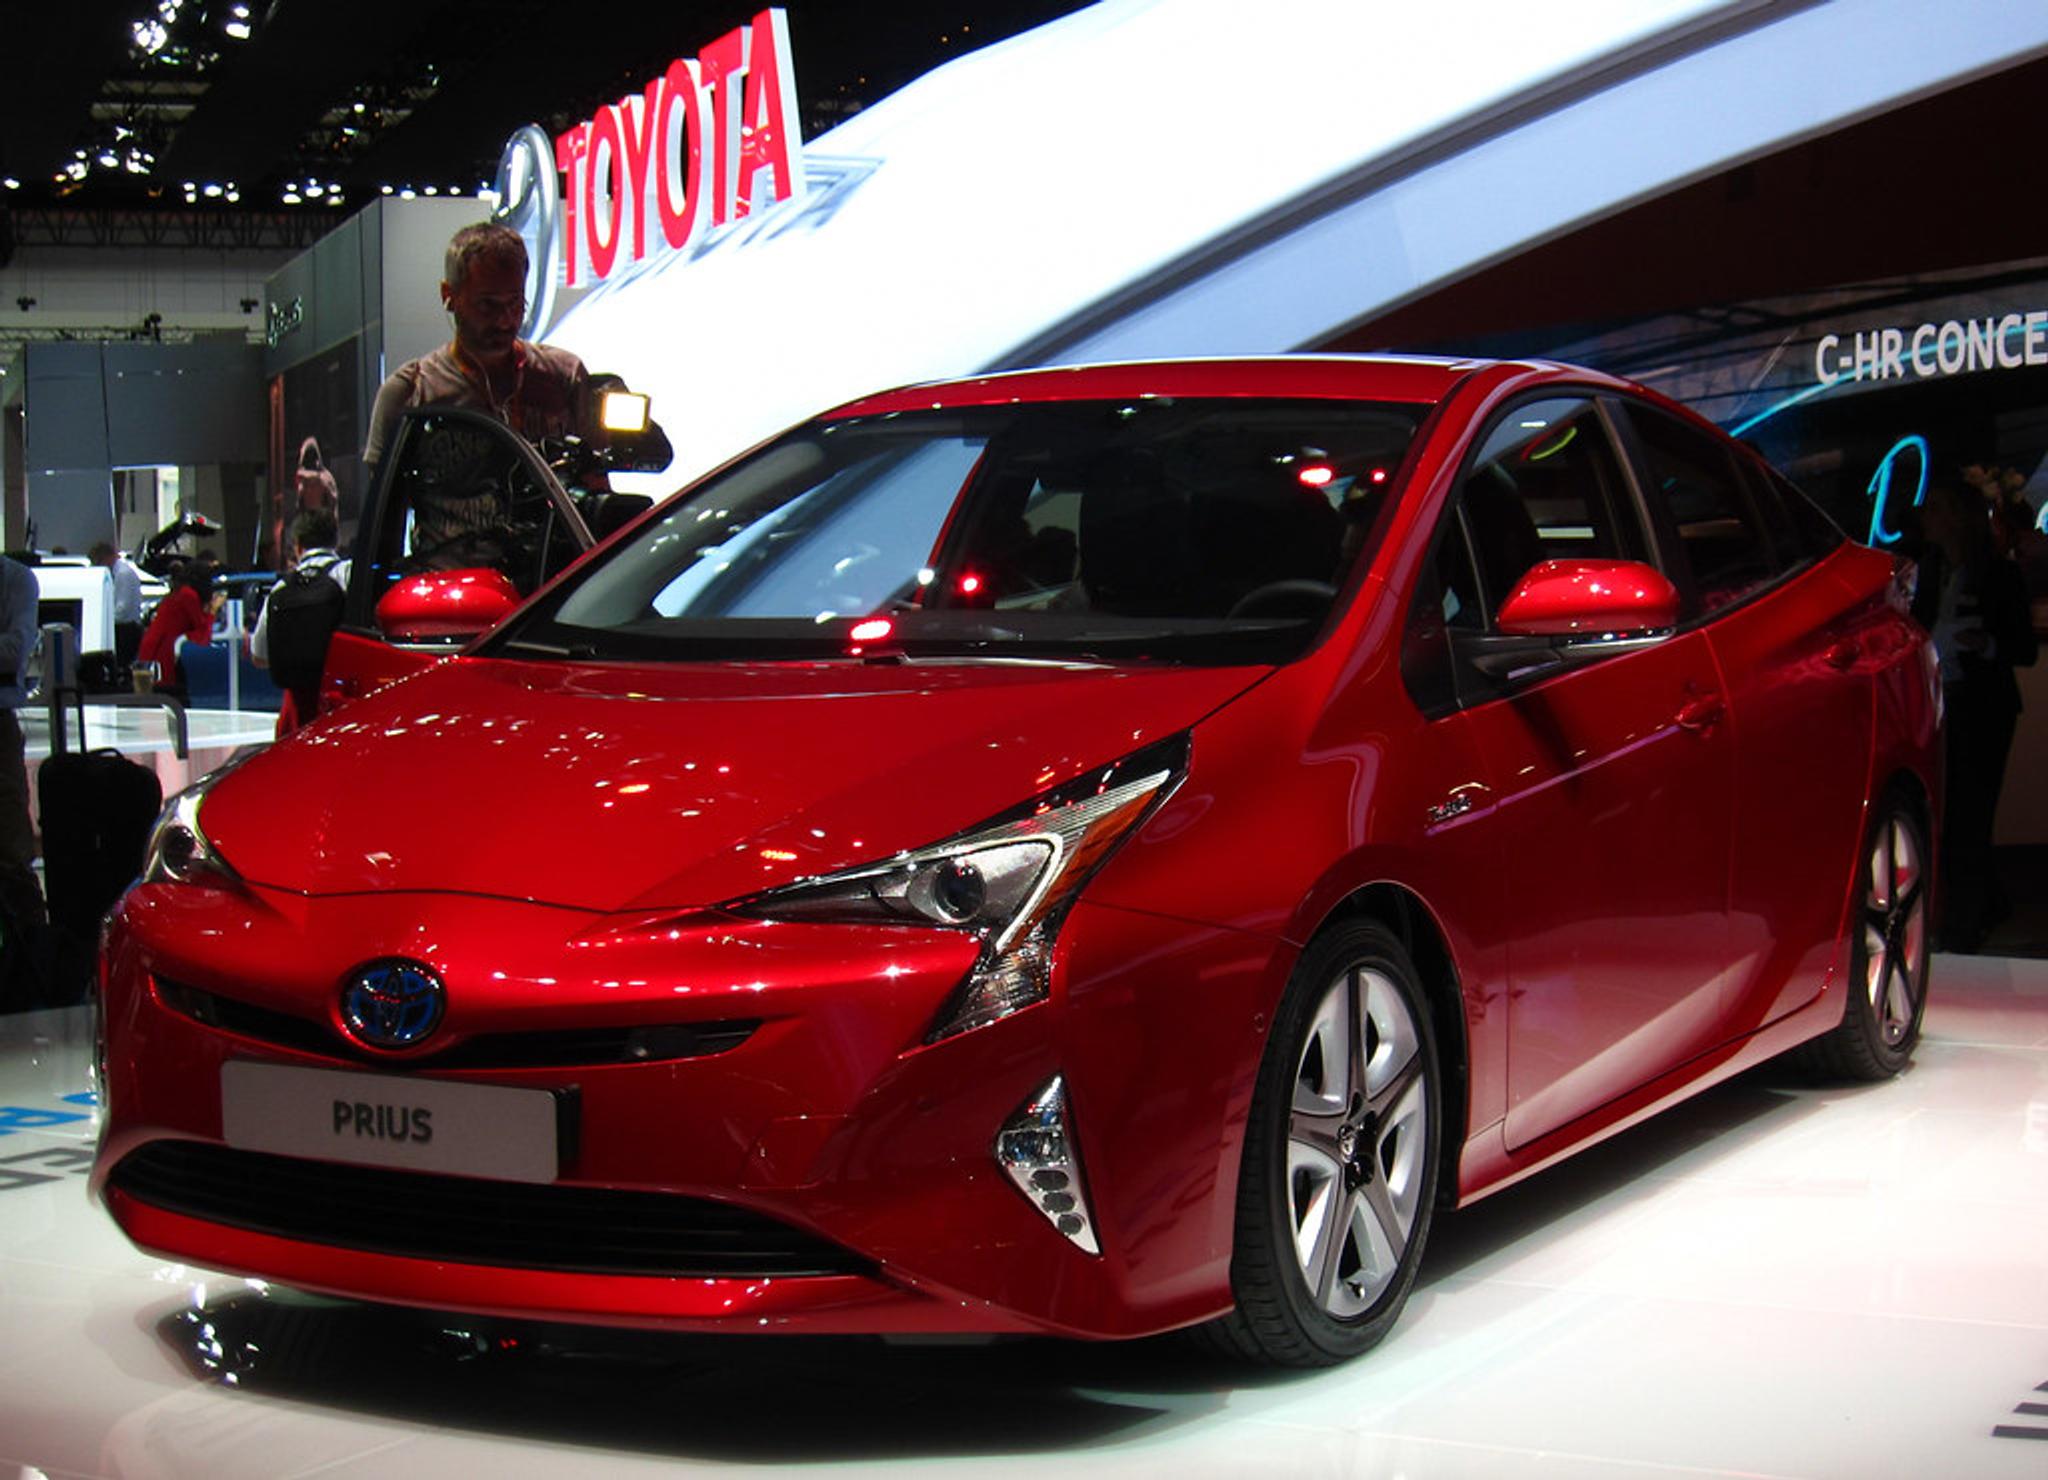 Cherry red Toyota Prius hybrid in a showroom